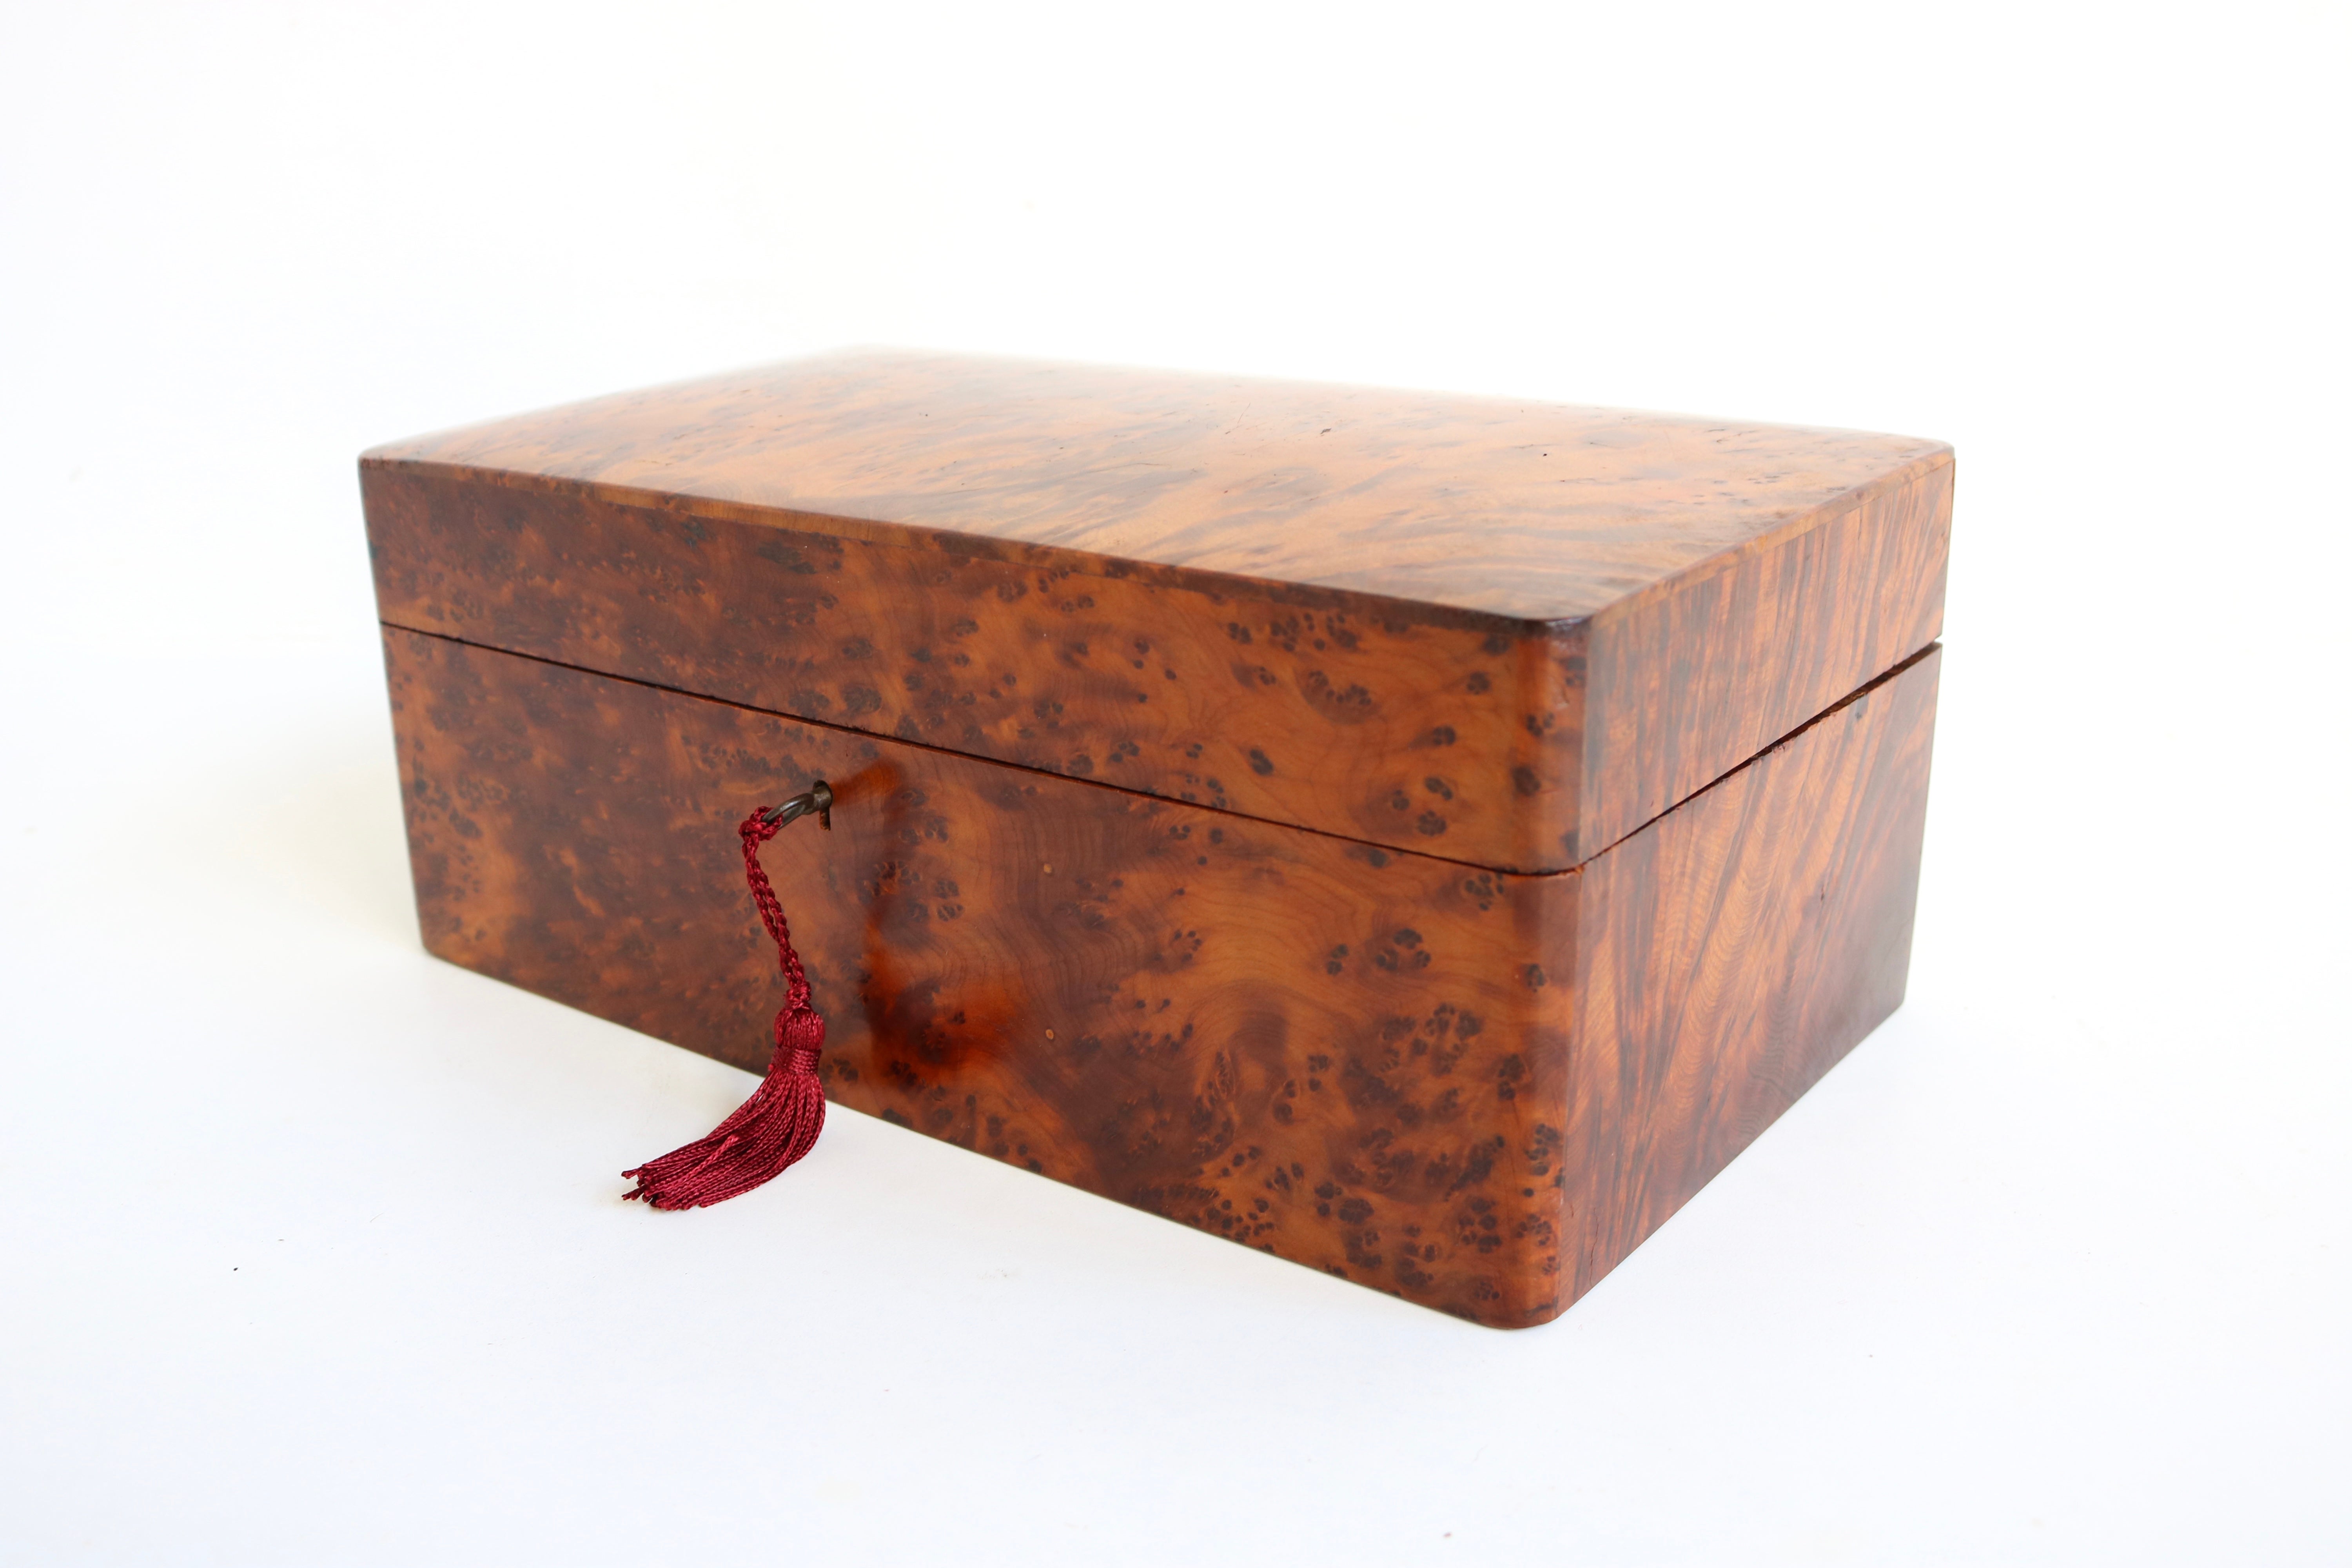 Marvelous Napoleon III 19th century antique Jewelry box in Burl wood from France. 
Impressive wood grain with slight curved edge on top. 
Comes with complete & gorgeous interior, very rare as these are often lost. 
Old repair to the hinges,